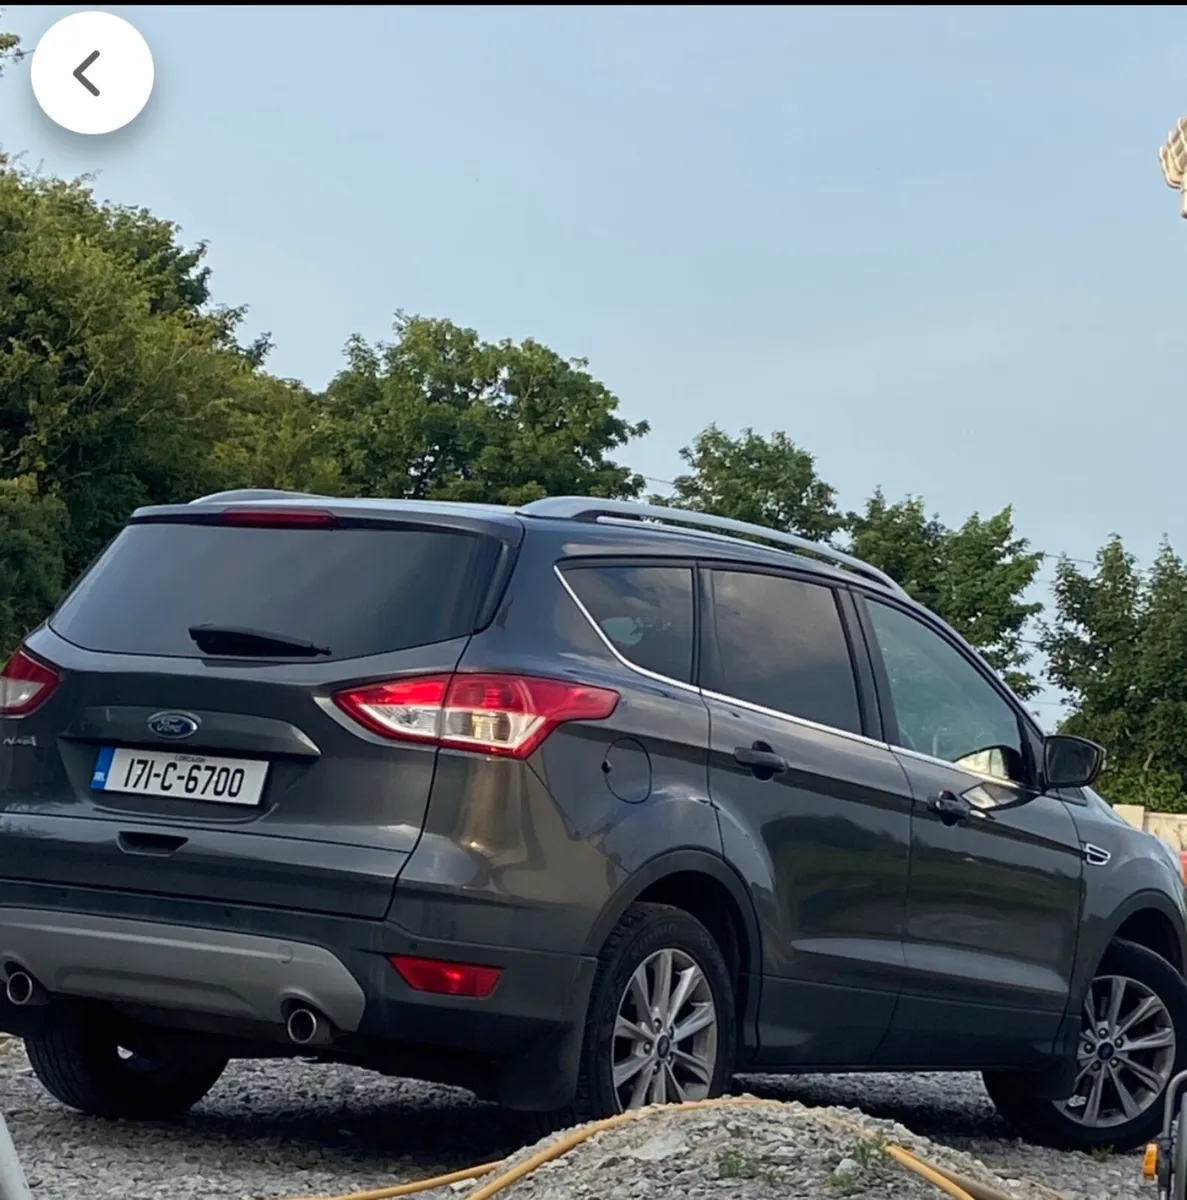 Ford Kuga commercial No Vat 5 seater